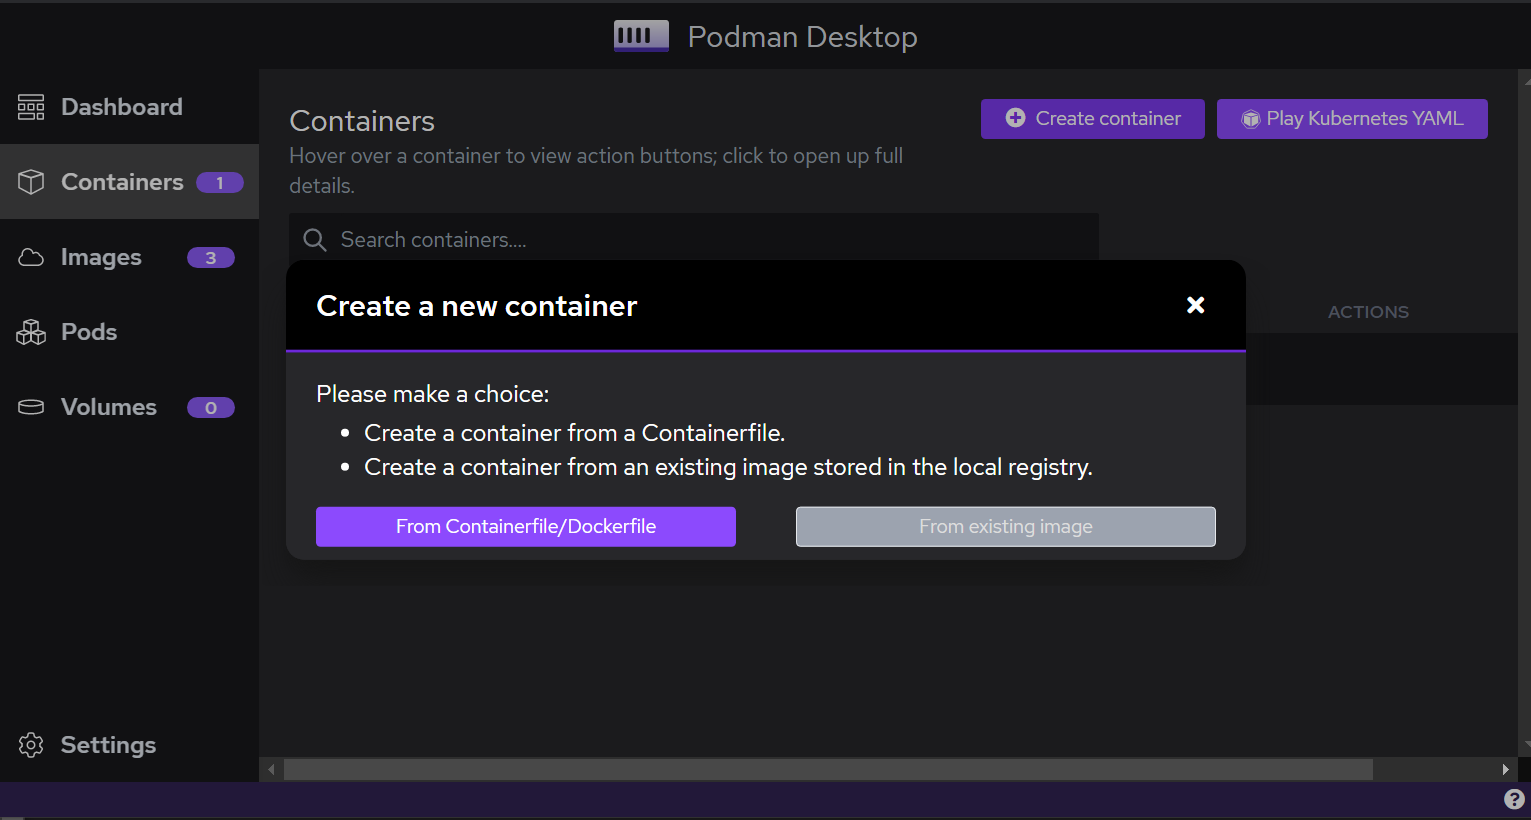 Podman Desktop dialog "Create container from Containerfile"